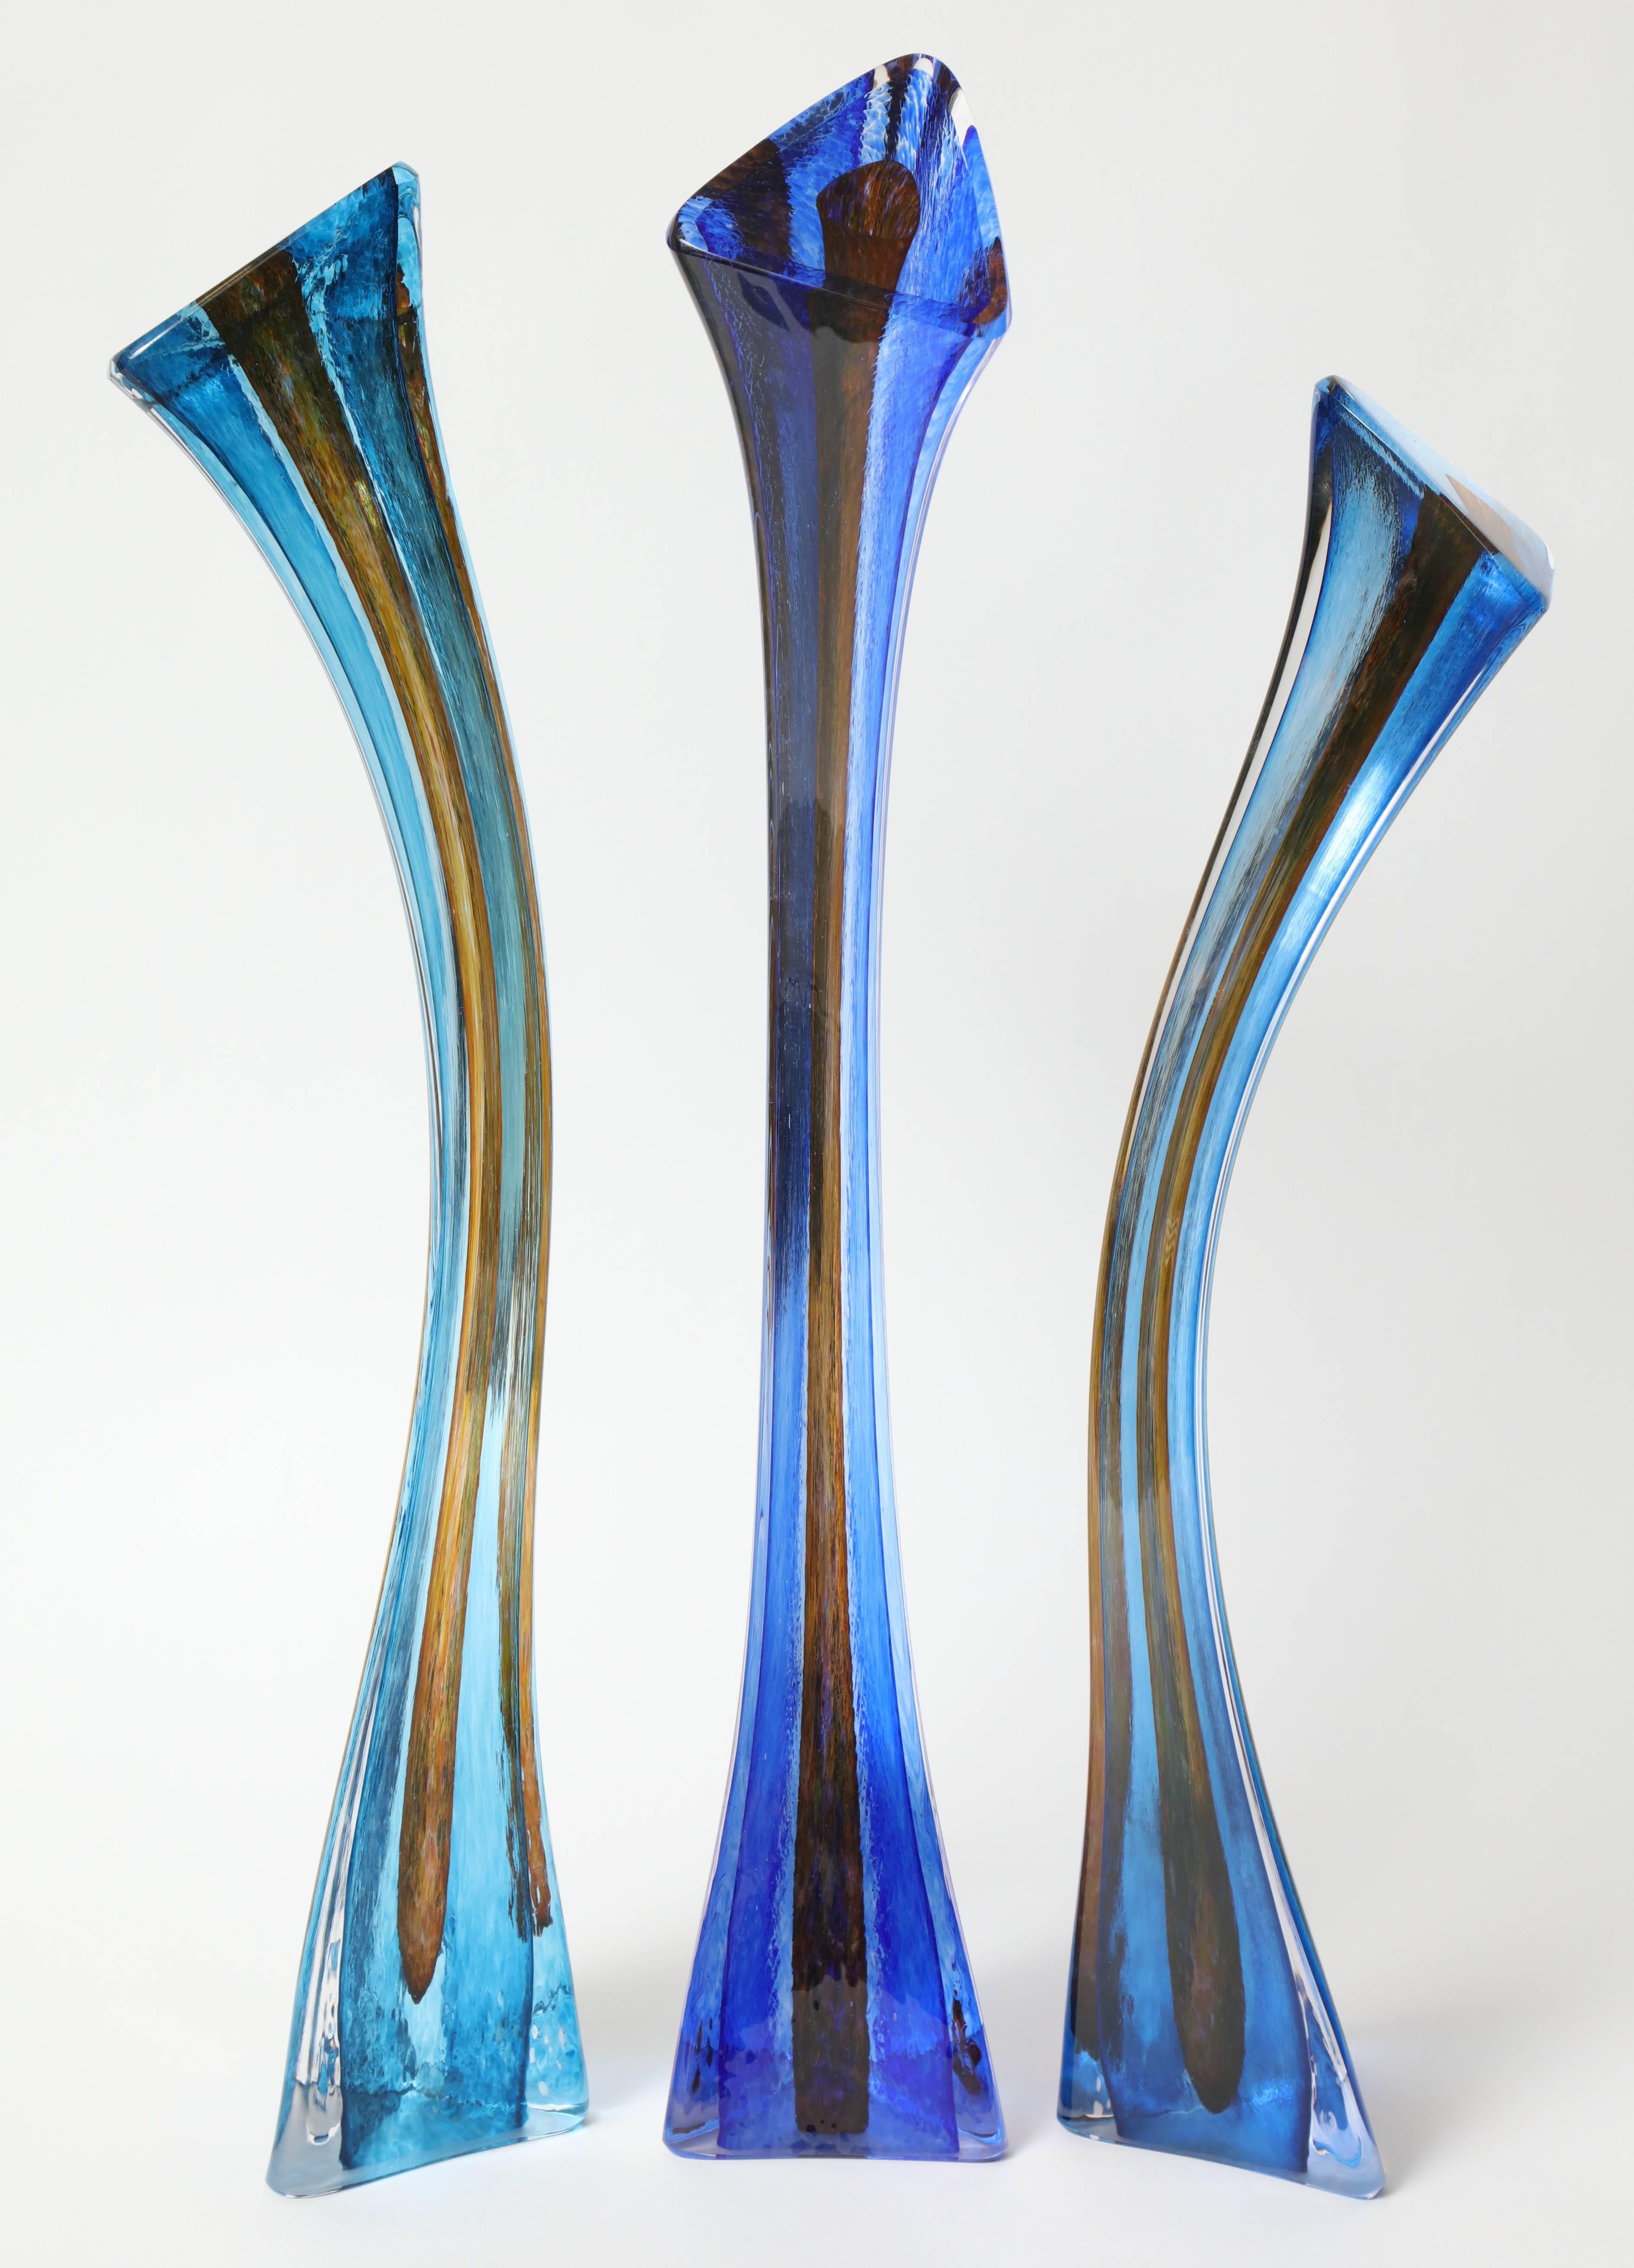 Contemporary American artist Barry Entner's "Triangle Solids" glass sculpture is created with consideration of each individual piece as paint strokes that, once assembled, becomes the desired composition. He doesn't make these using